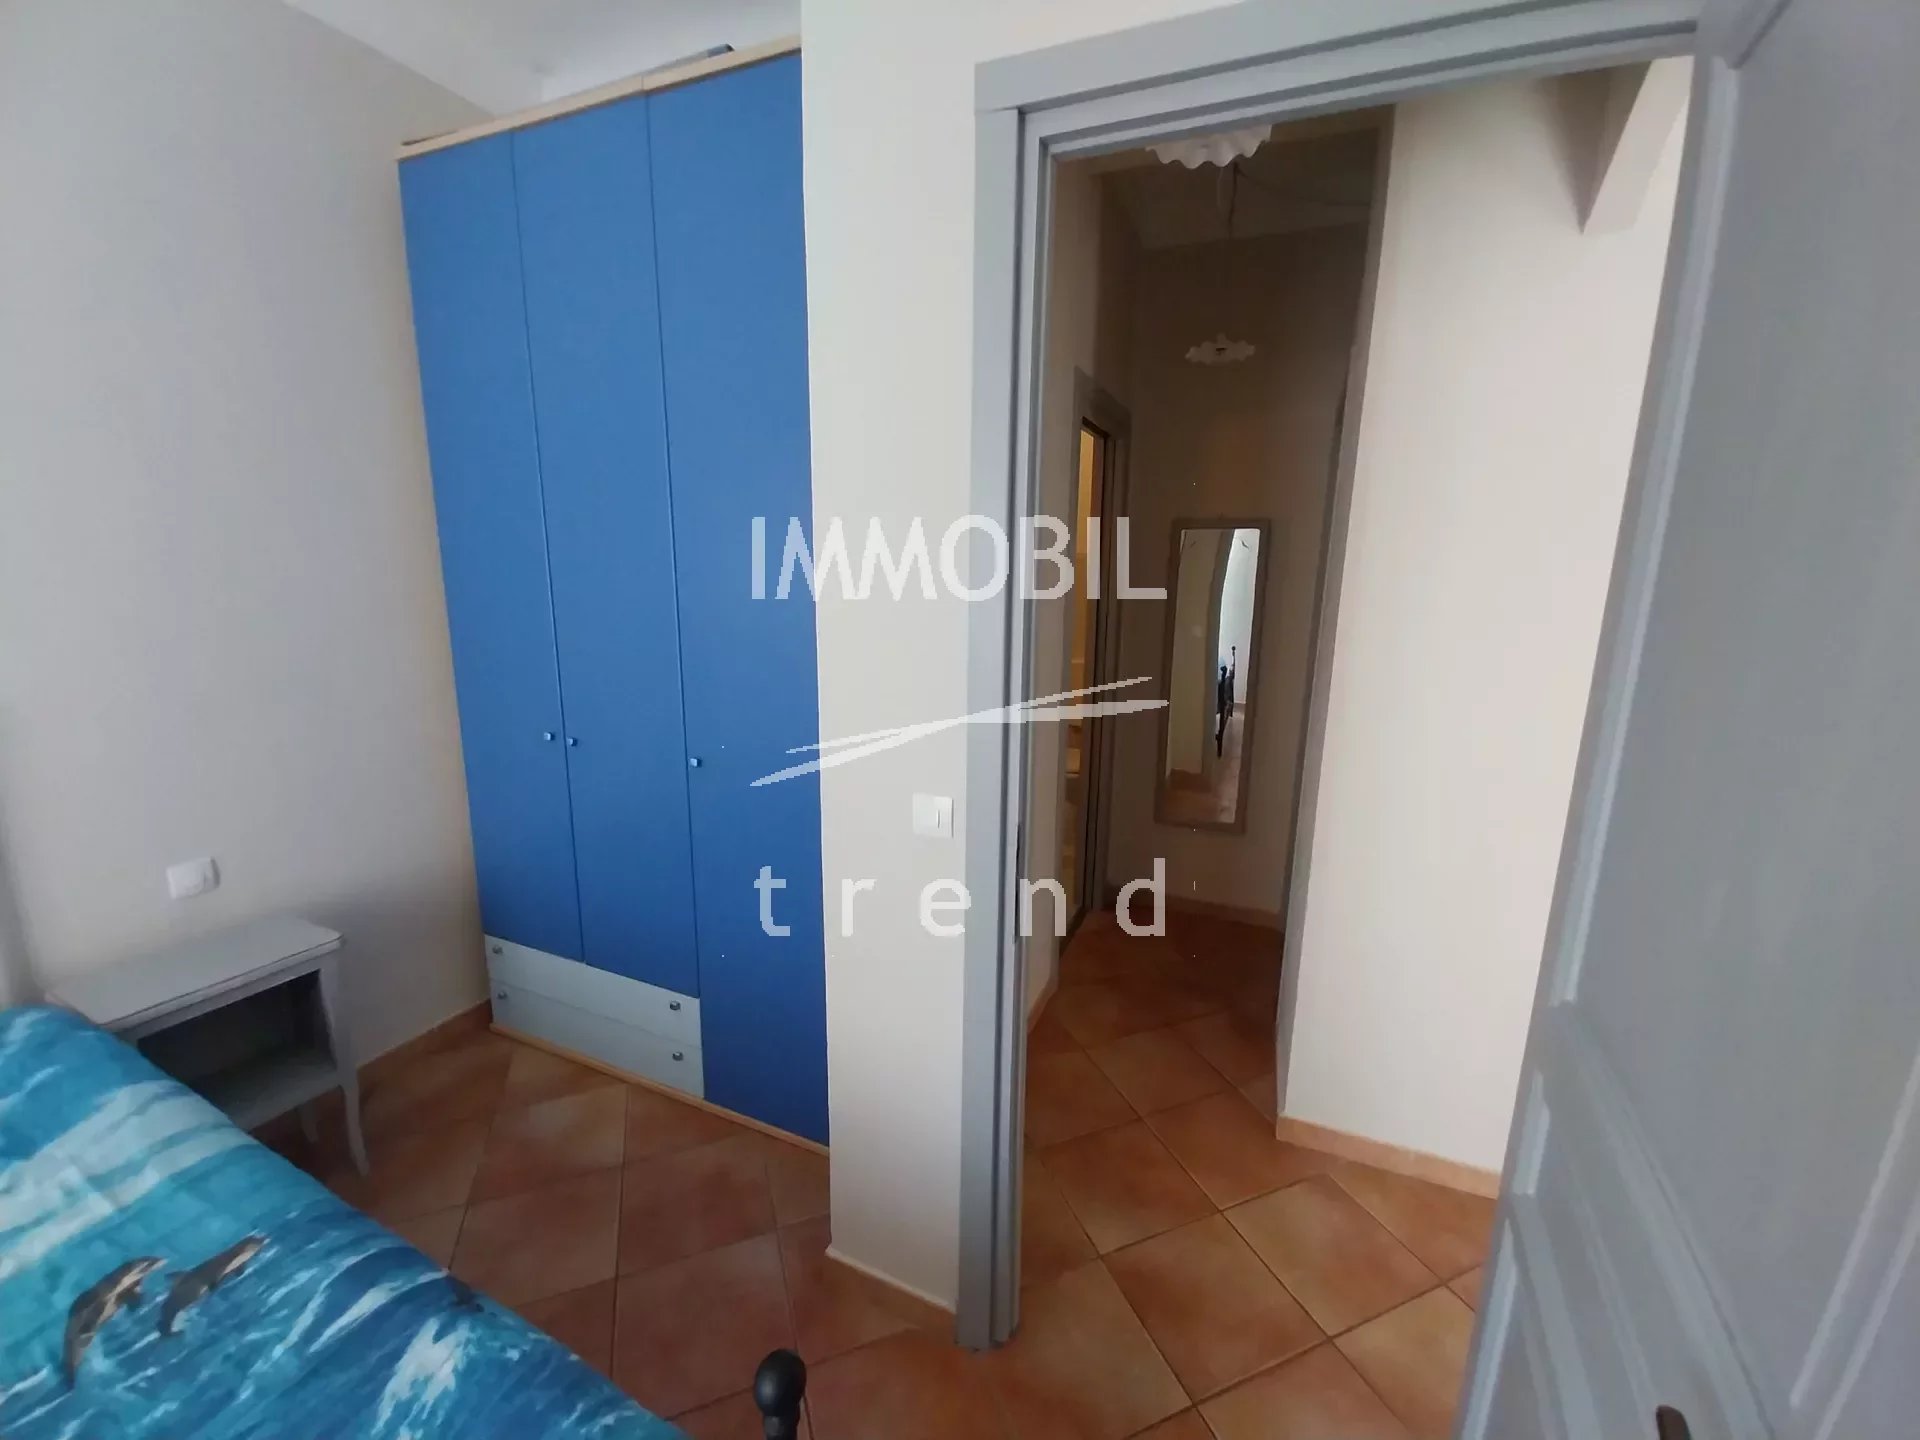 MENTON TOWN CENTRE - Bright one bedroom apartment with balcony